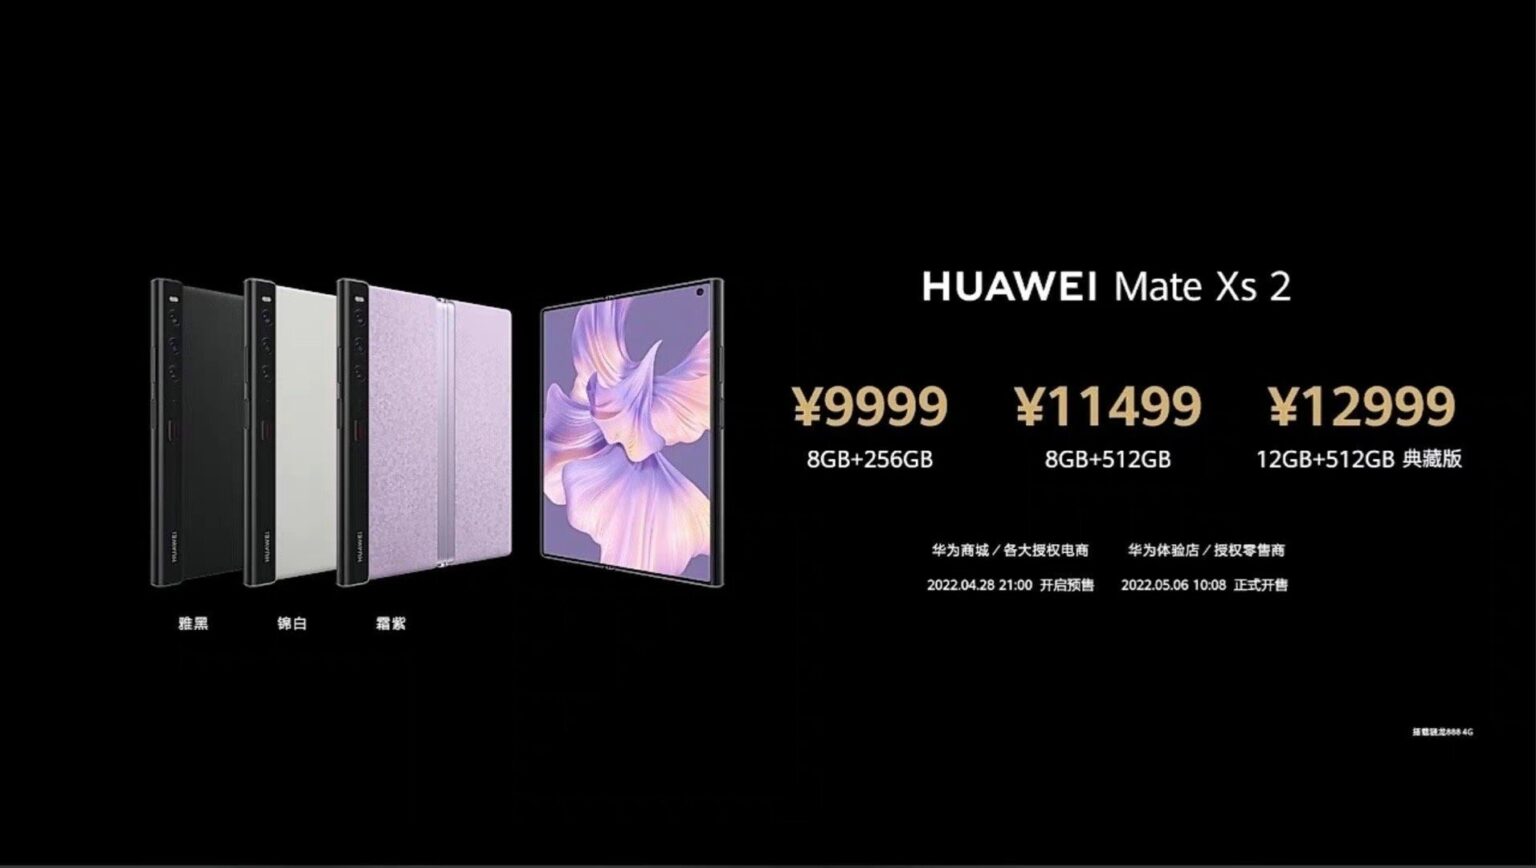 Huawei Mate XS 2 launched from 34.7 million VND to Samsung Galaxy Z Fold3 - Photo 3.